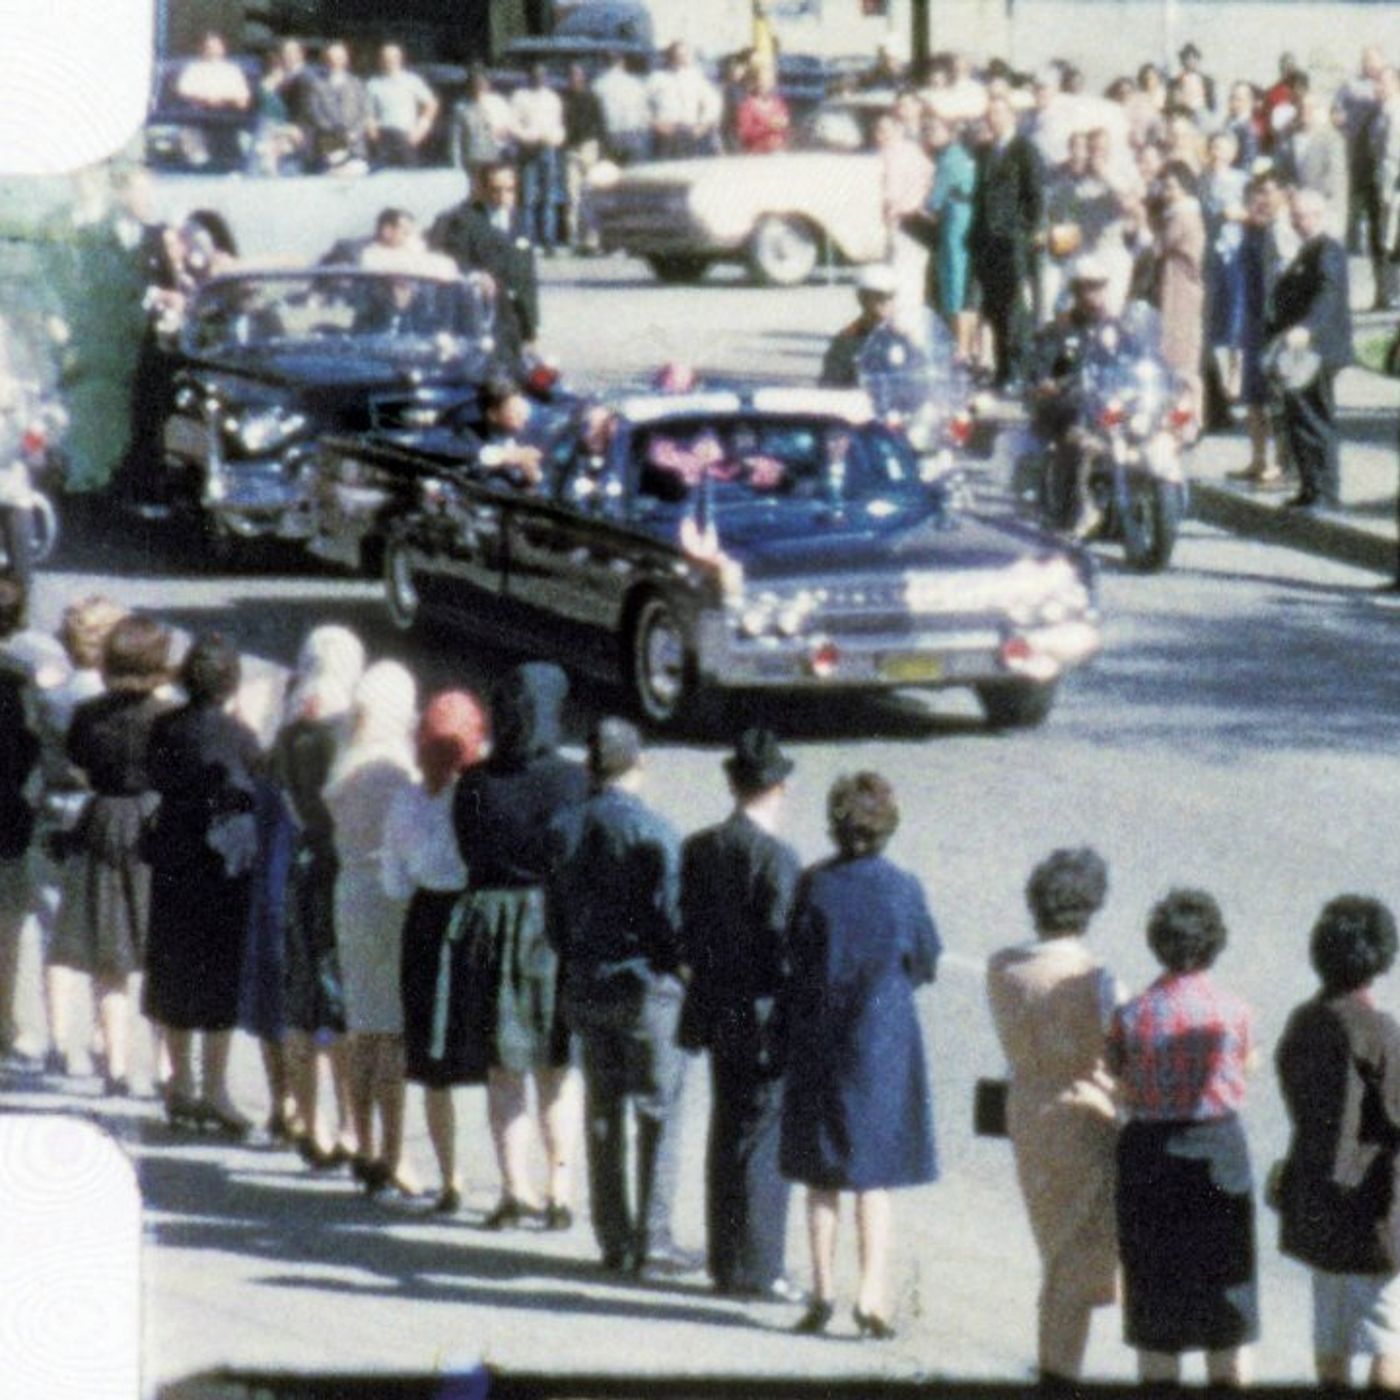 35: The JFK ASSASSINATION Then and Now